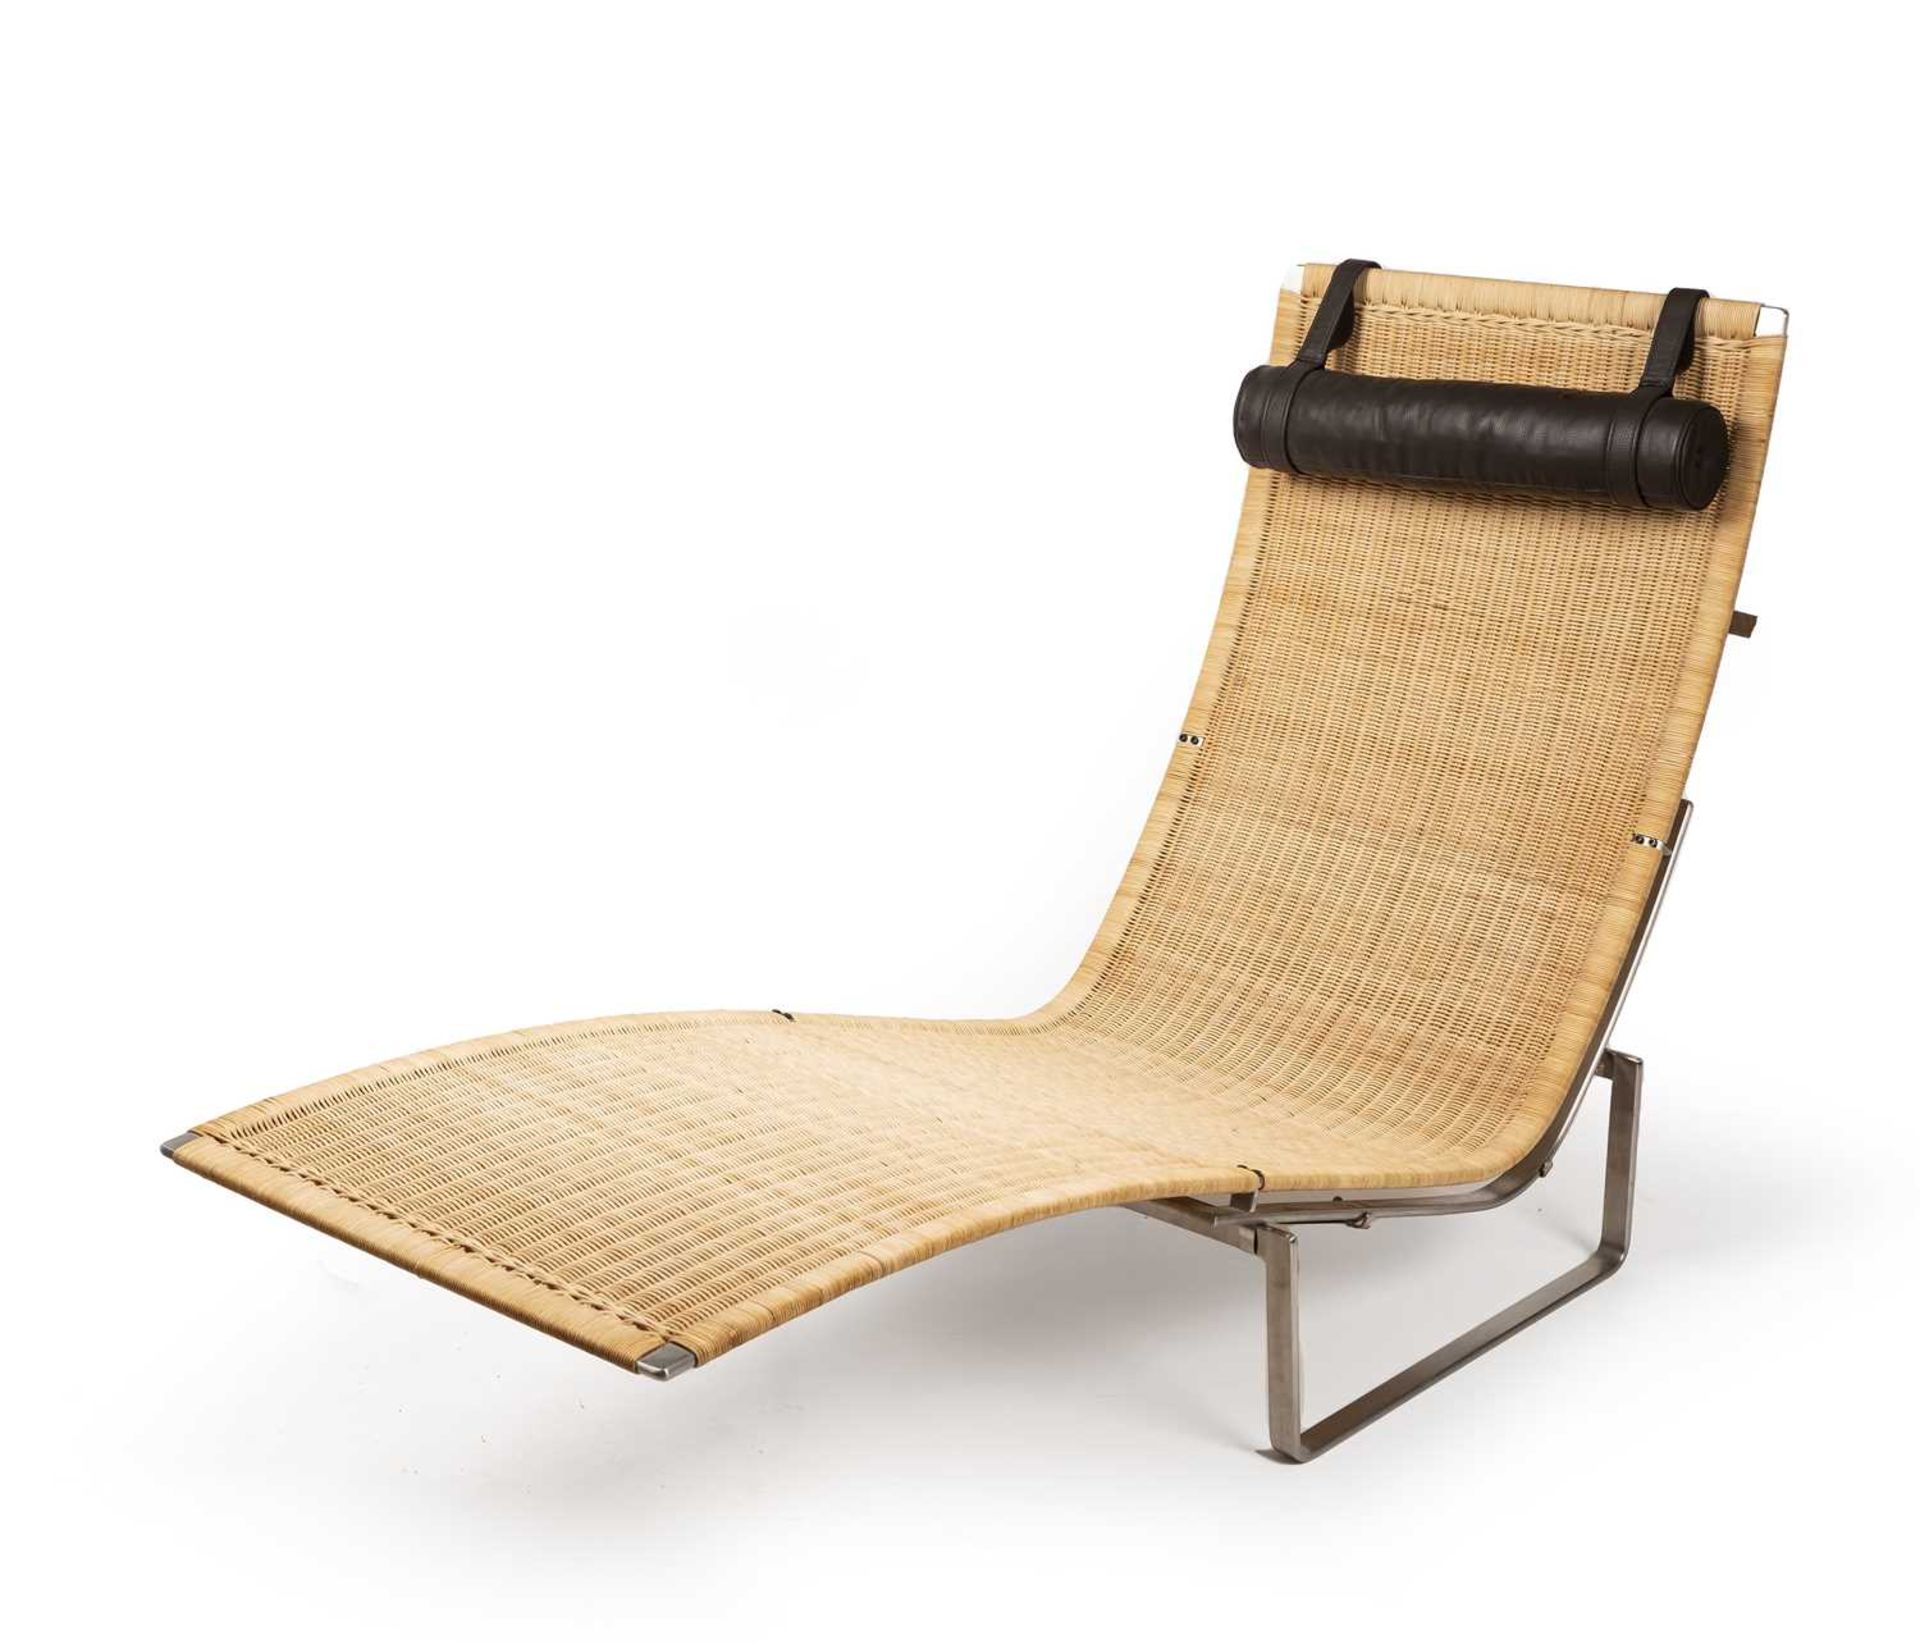 Poul Kjaerholm (1929-1980) for Fritz Hansen PK24 lounge chair the wicker seat with metal frame and